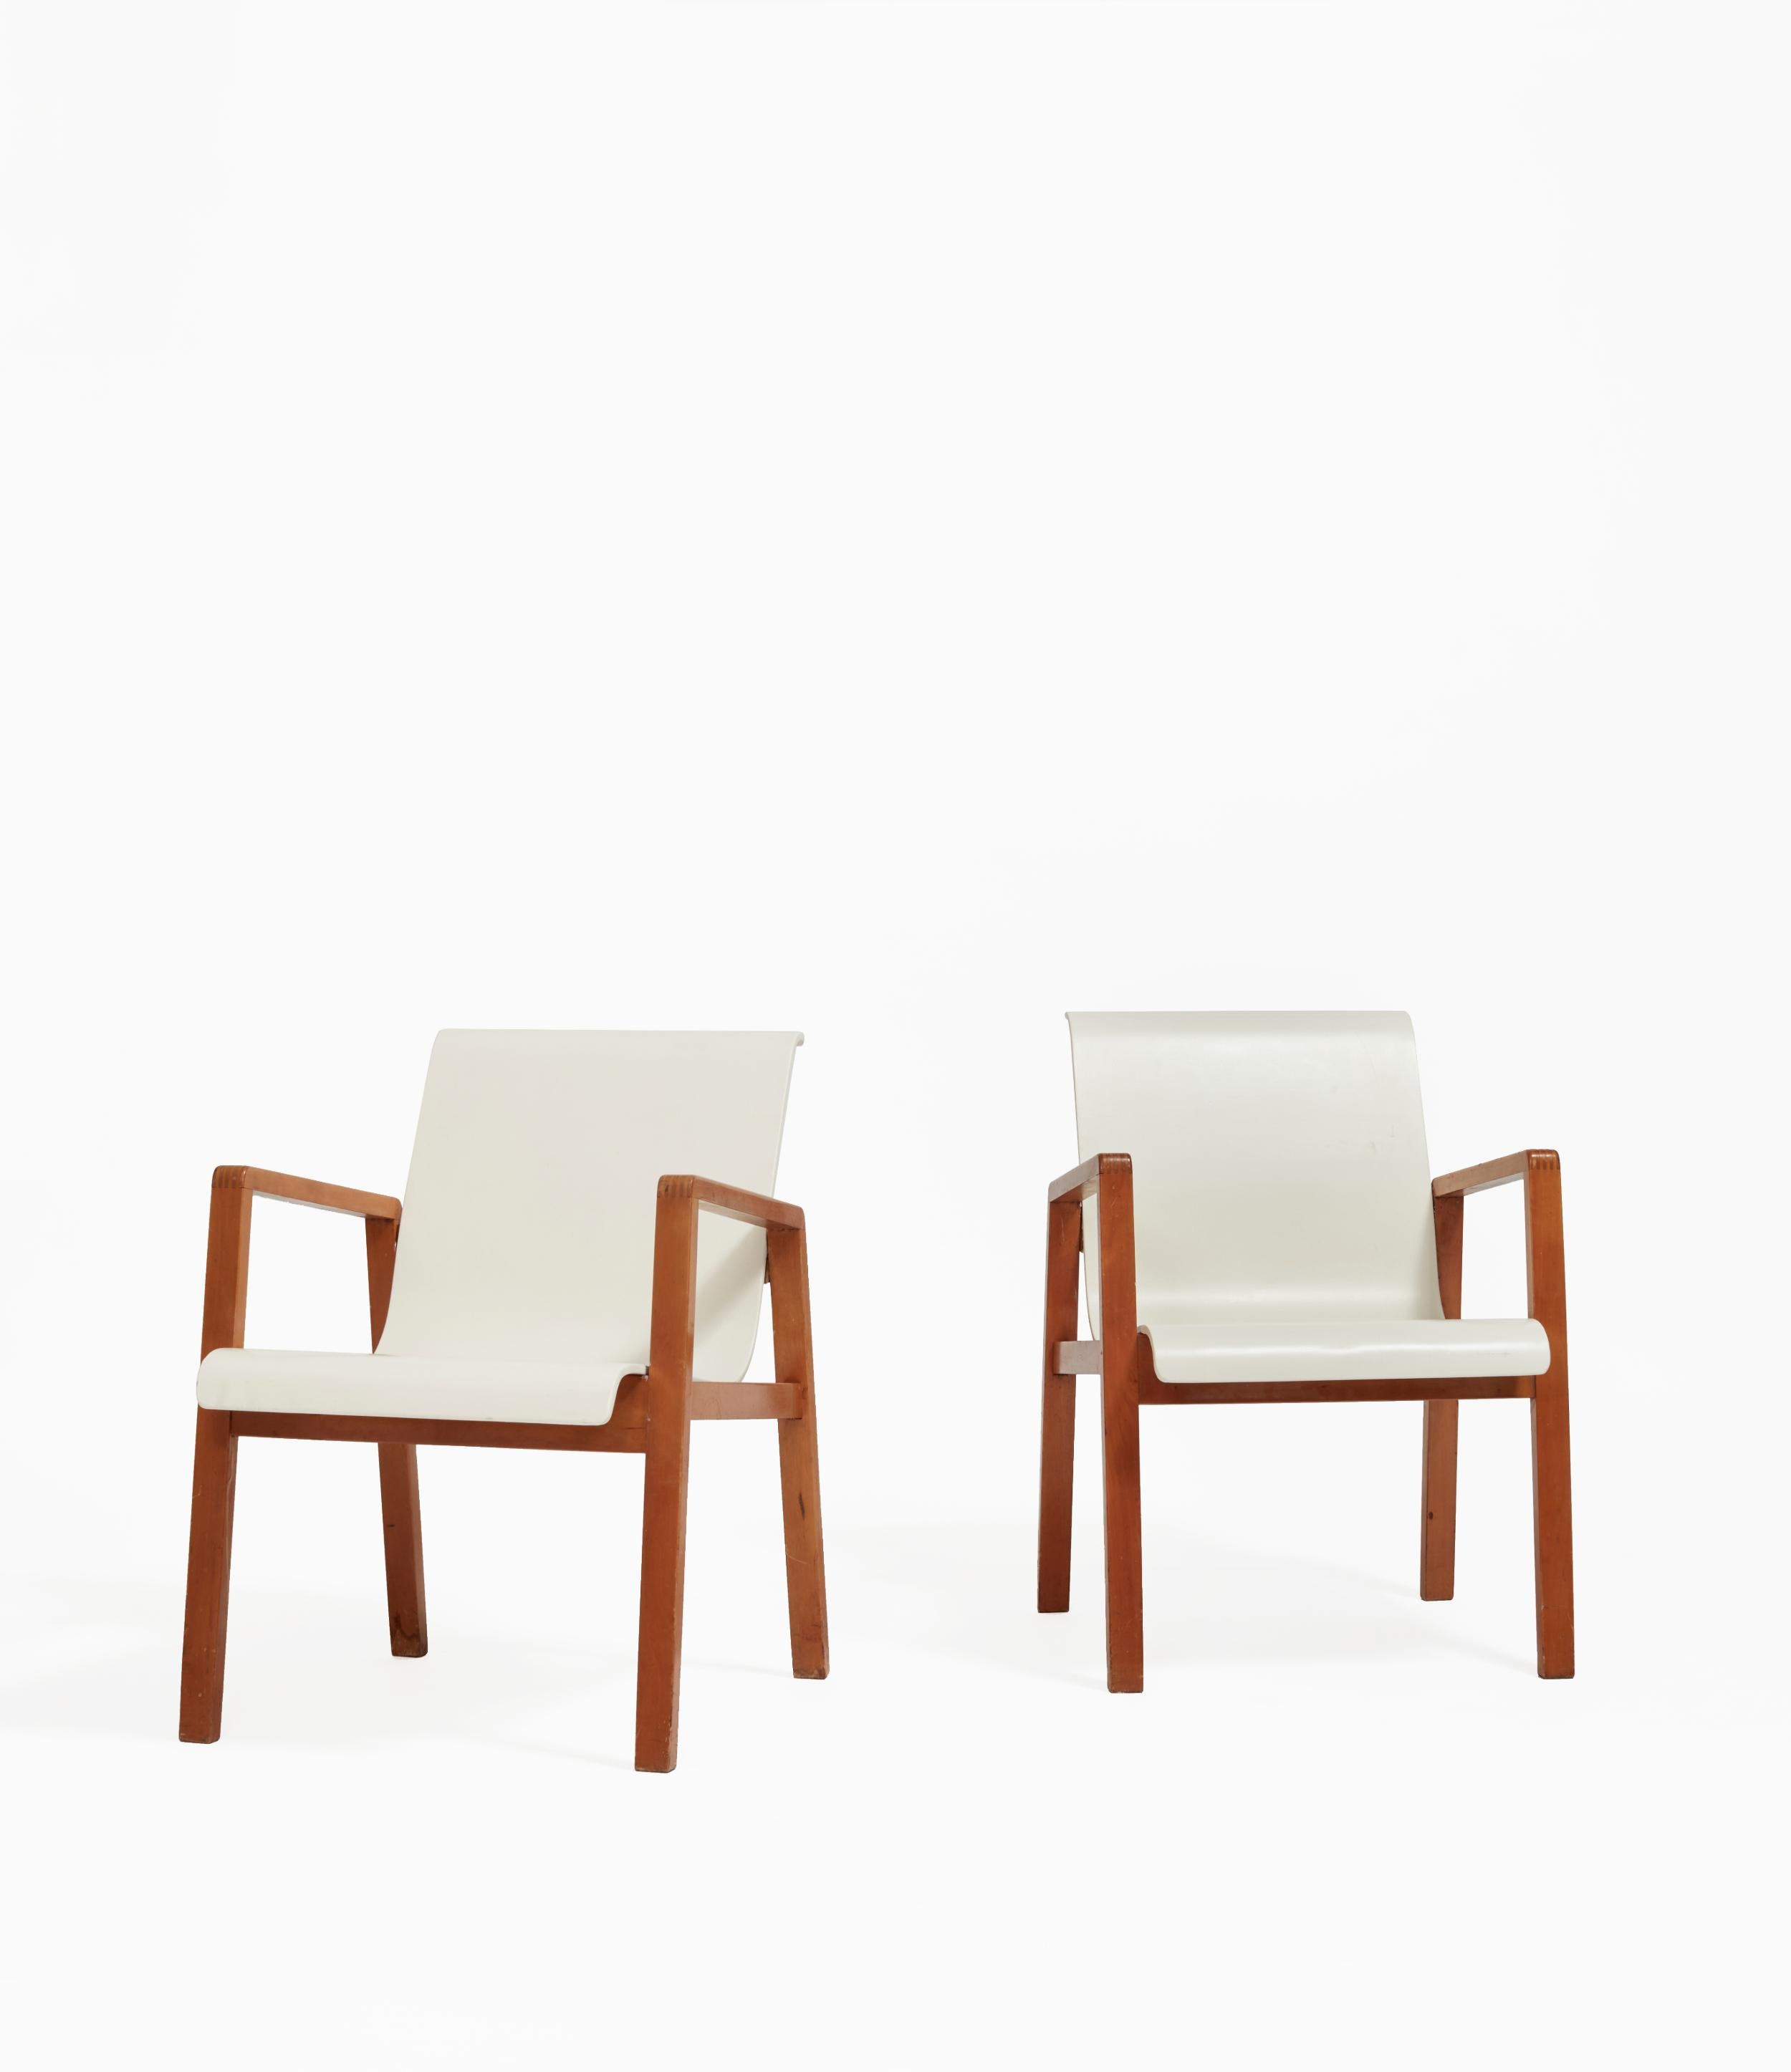 The Model 403, or Hallway Chair, is a stackable chair originally designed for a Finnish medical centre in 1932. Finnish modernism finds its structural motif in the form of the Model 403, comprised of solid birchwood and pressed and bent birch